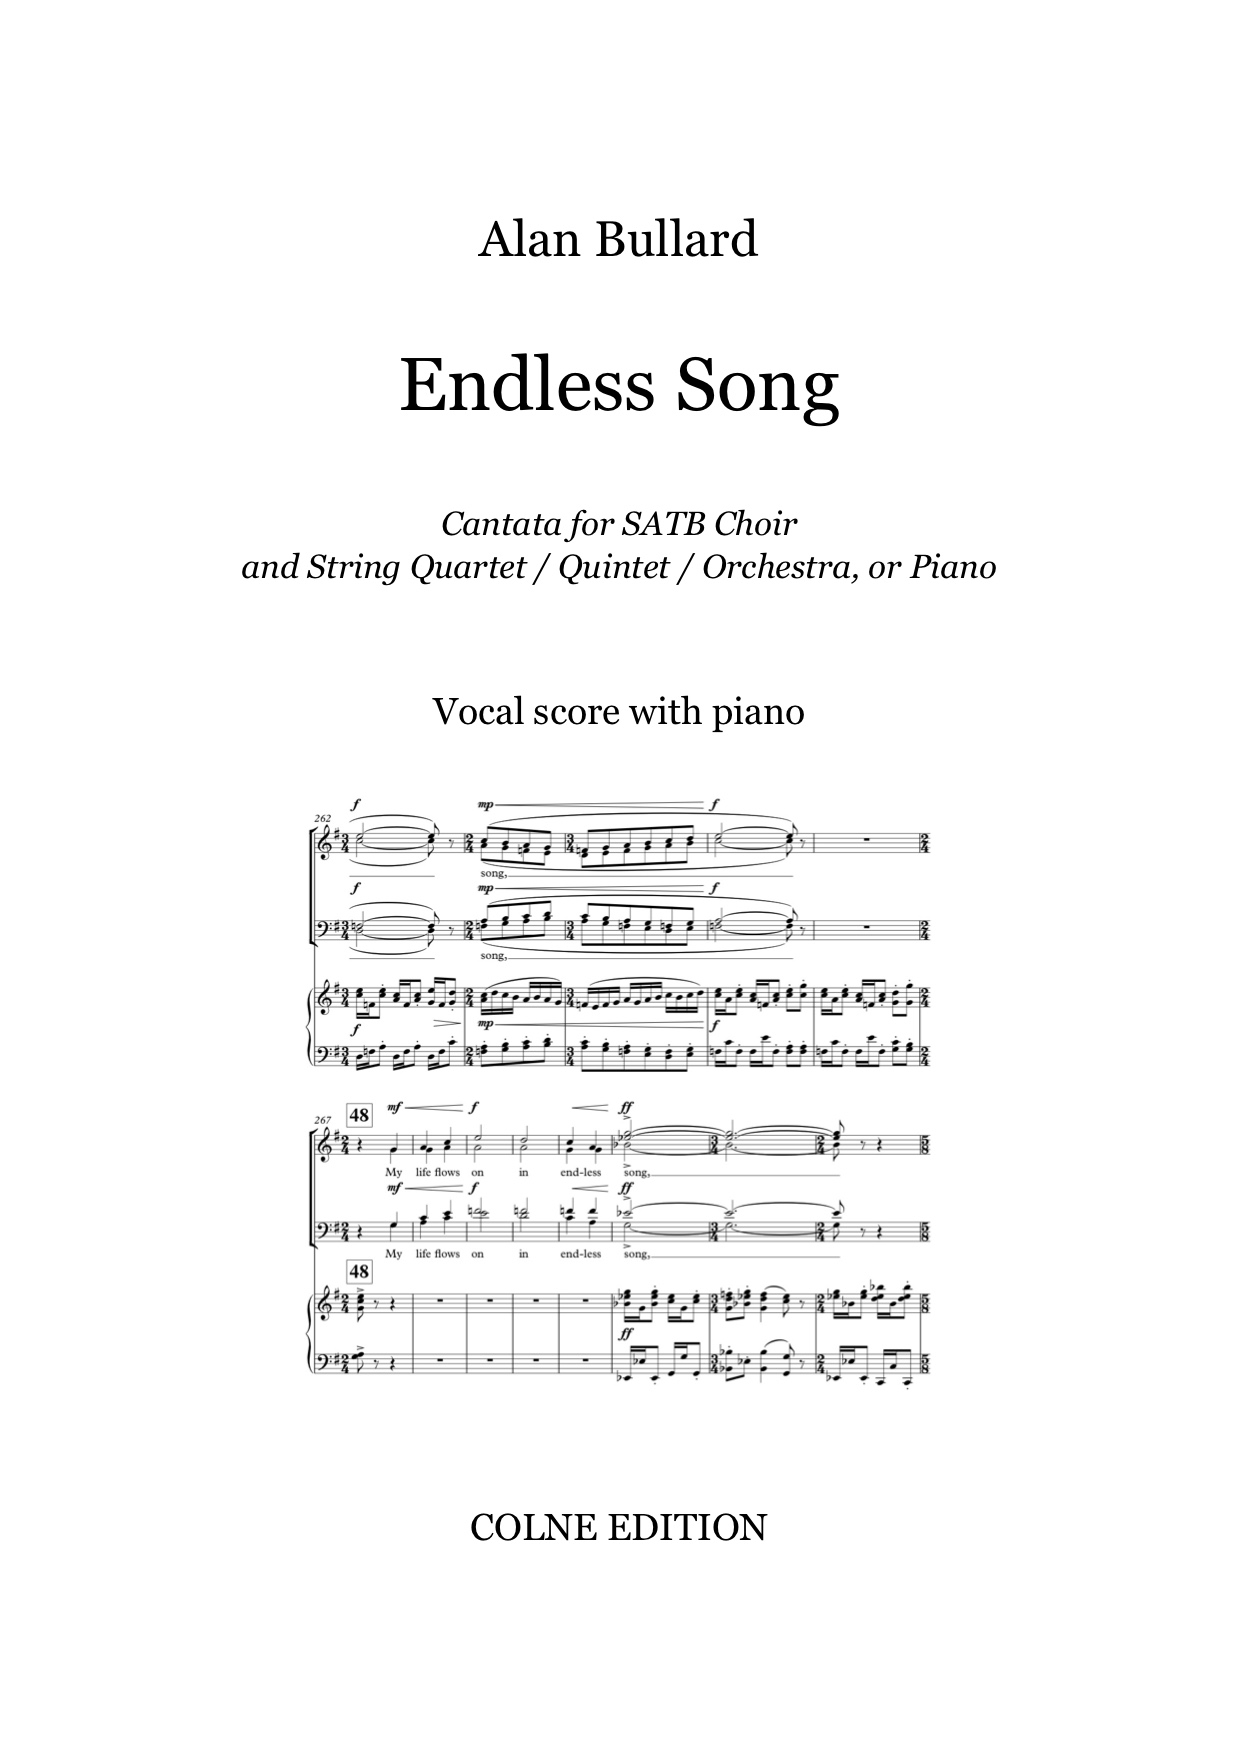 Bullard: Endless Song published by Colne Edition - Vocal Score